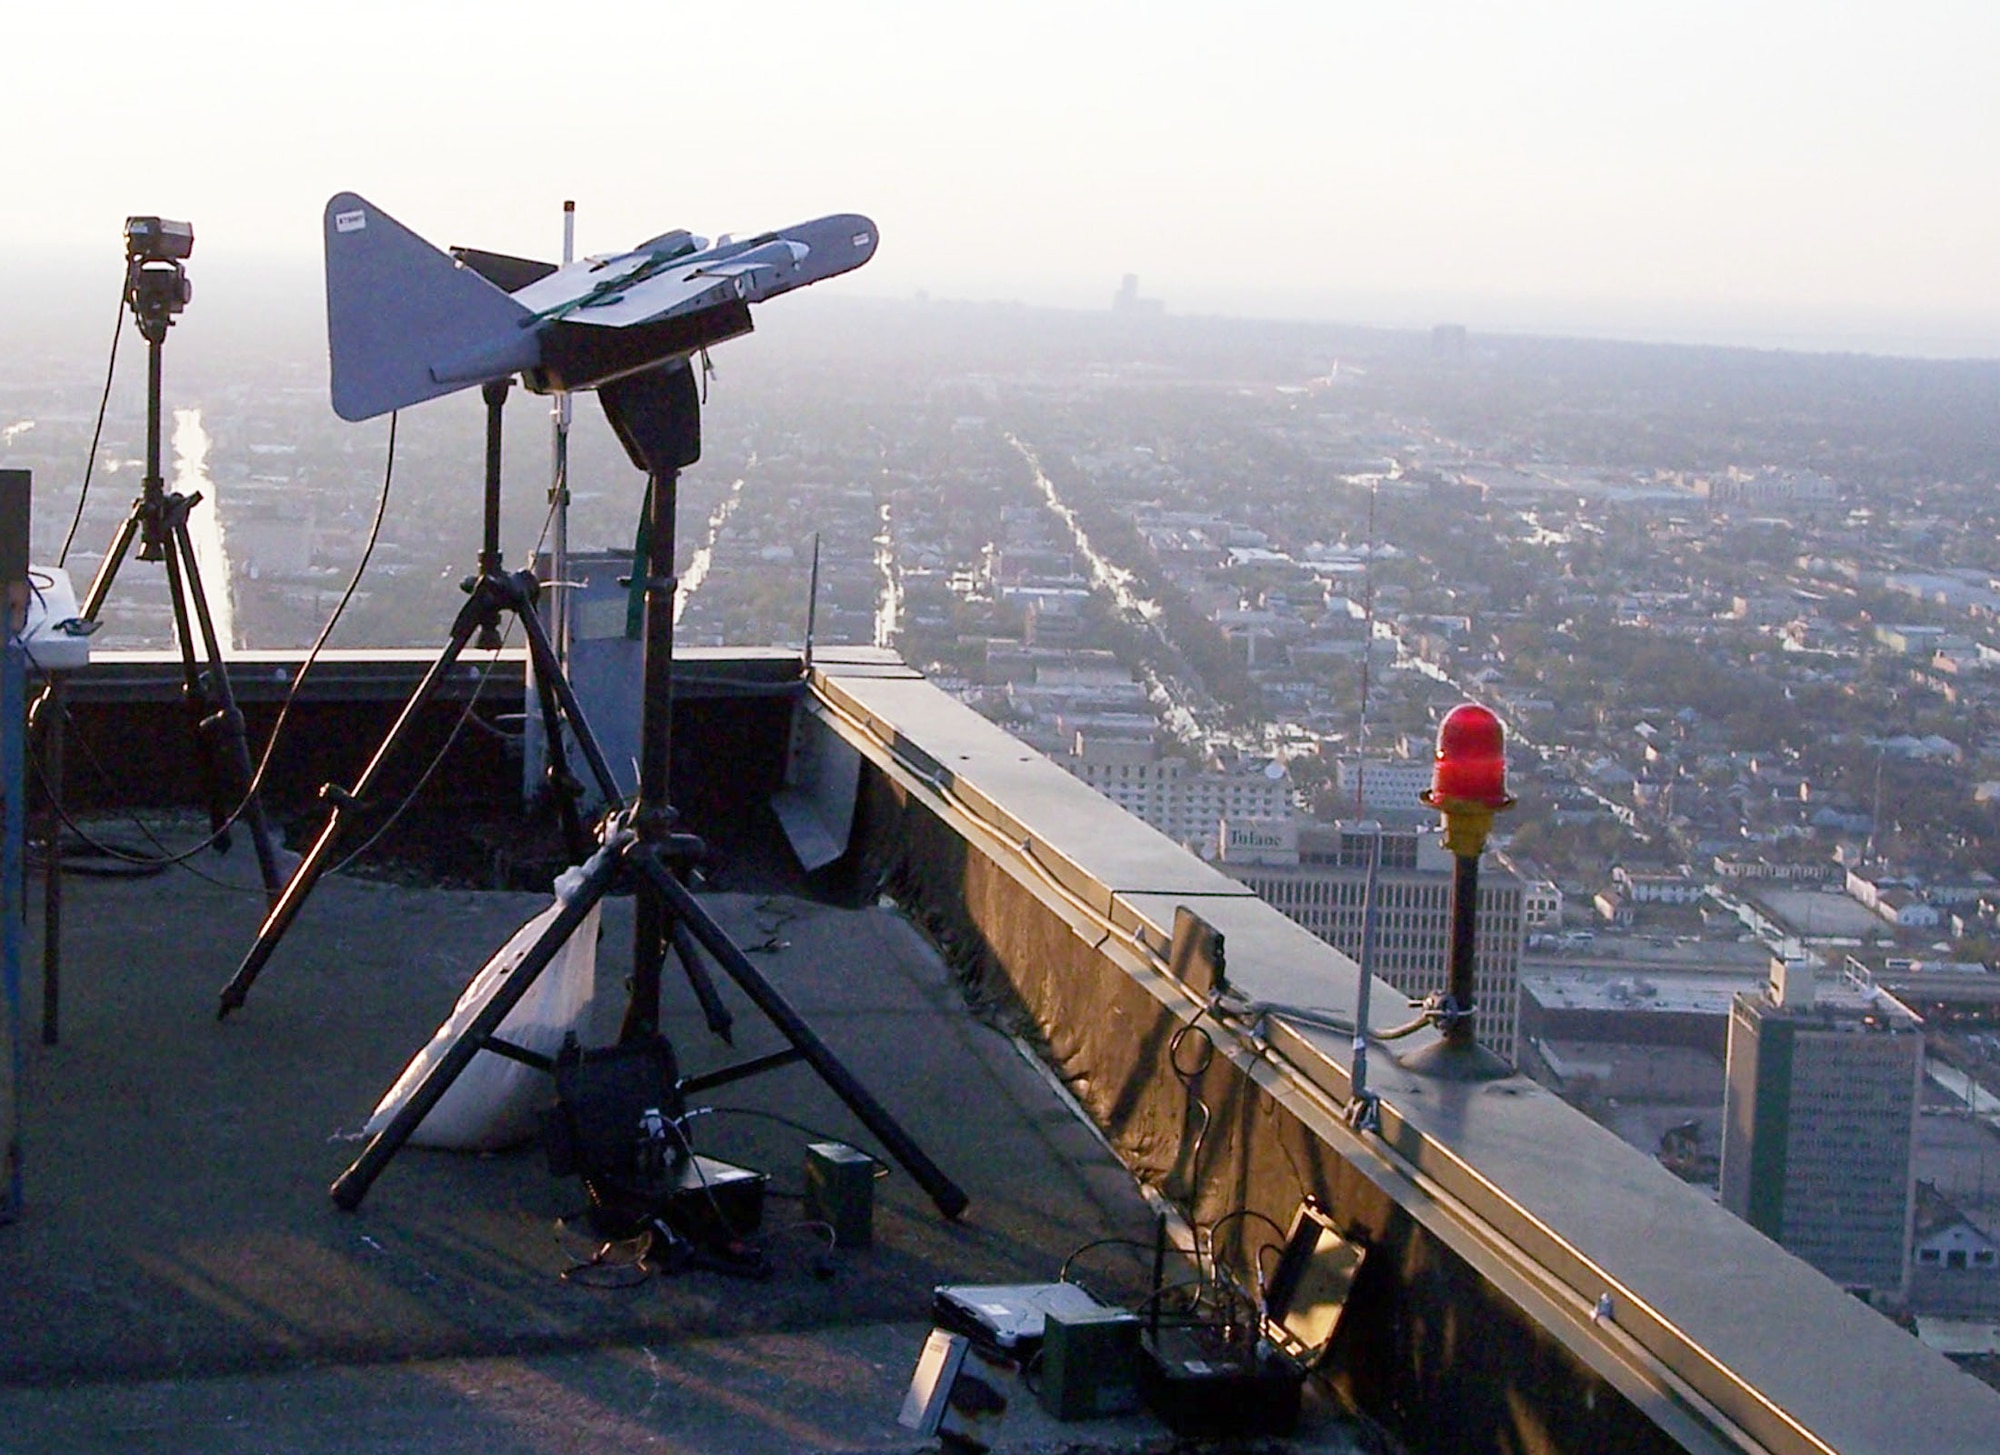 NEW ORLEANS -- An unmanned aerial vehicle, mounted on a pole, uses its remote operations video enhanced receiver, or ROVER, to help find survivors of Hurricane Katrina here and support relief efforts.  (U.S. Air Force photo by Staff Sgt. James Wiger) 